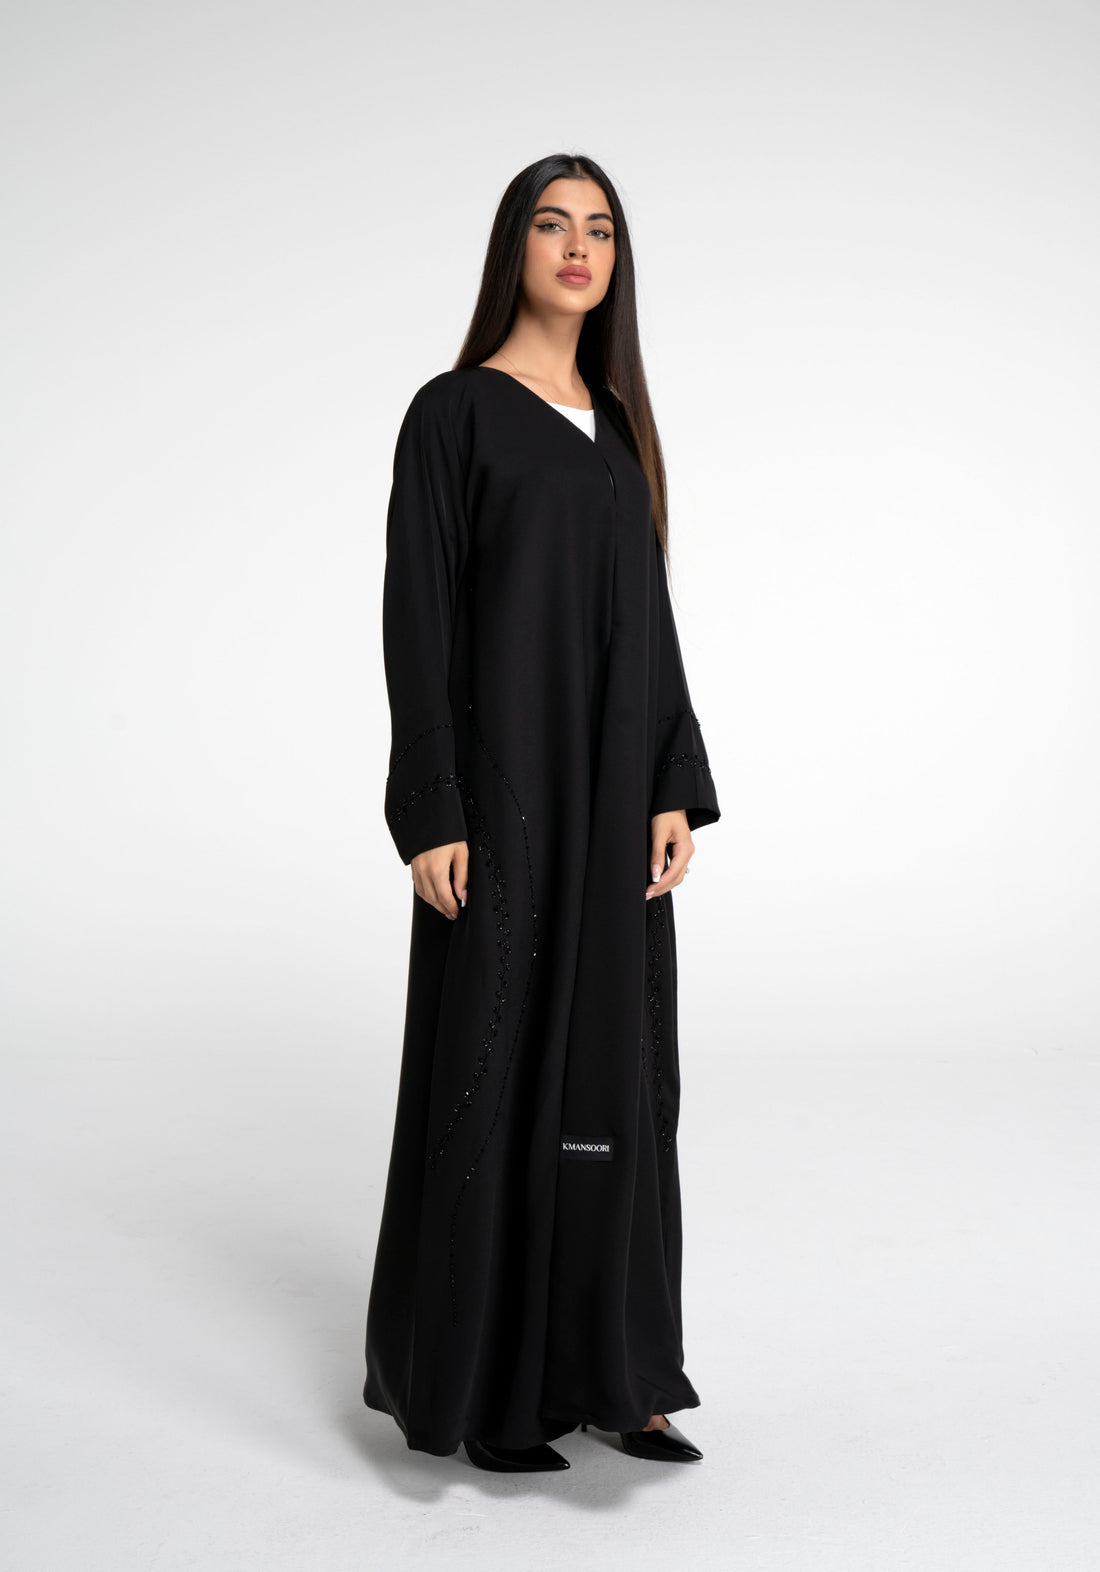 Take The Limelight With Our Breathtaking Abayas!